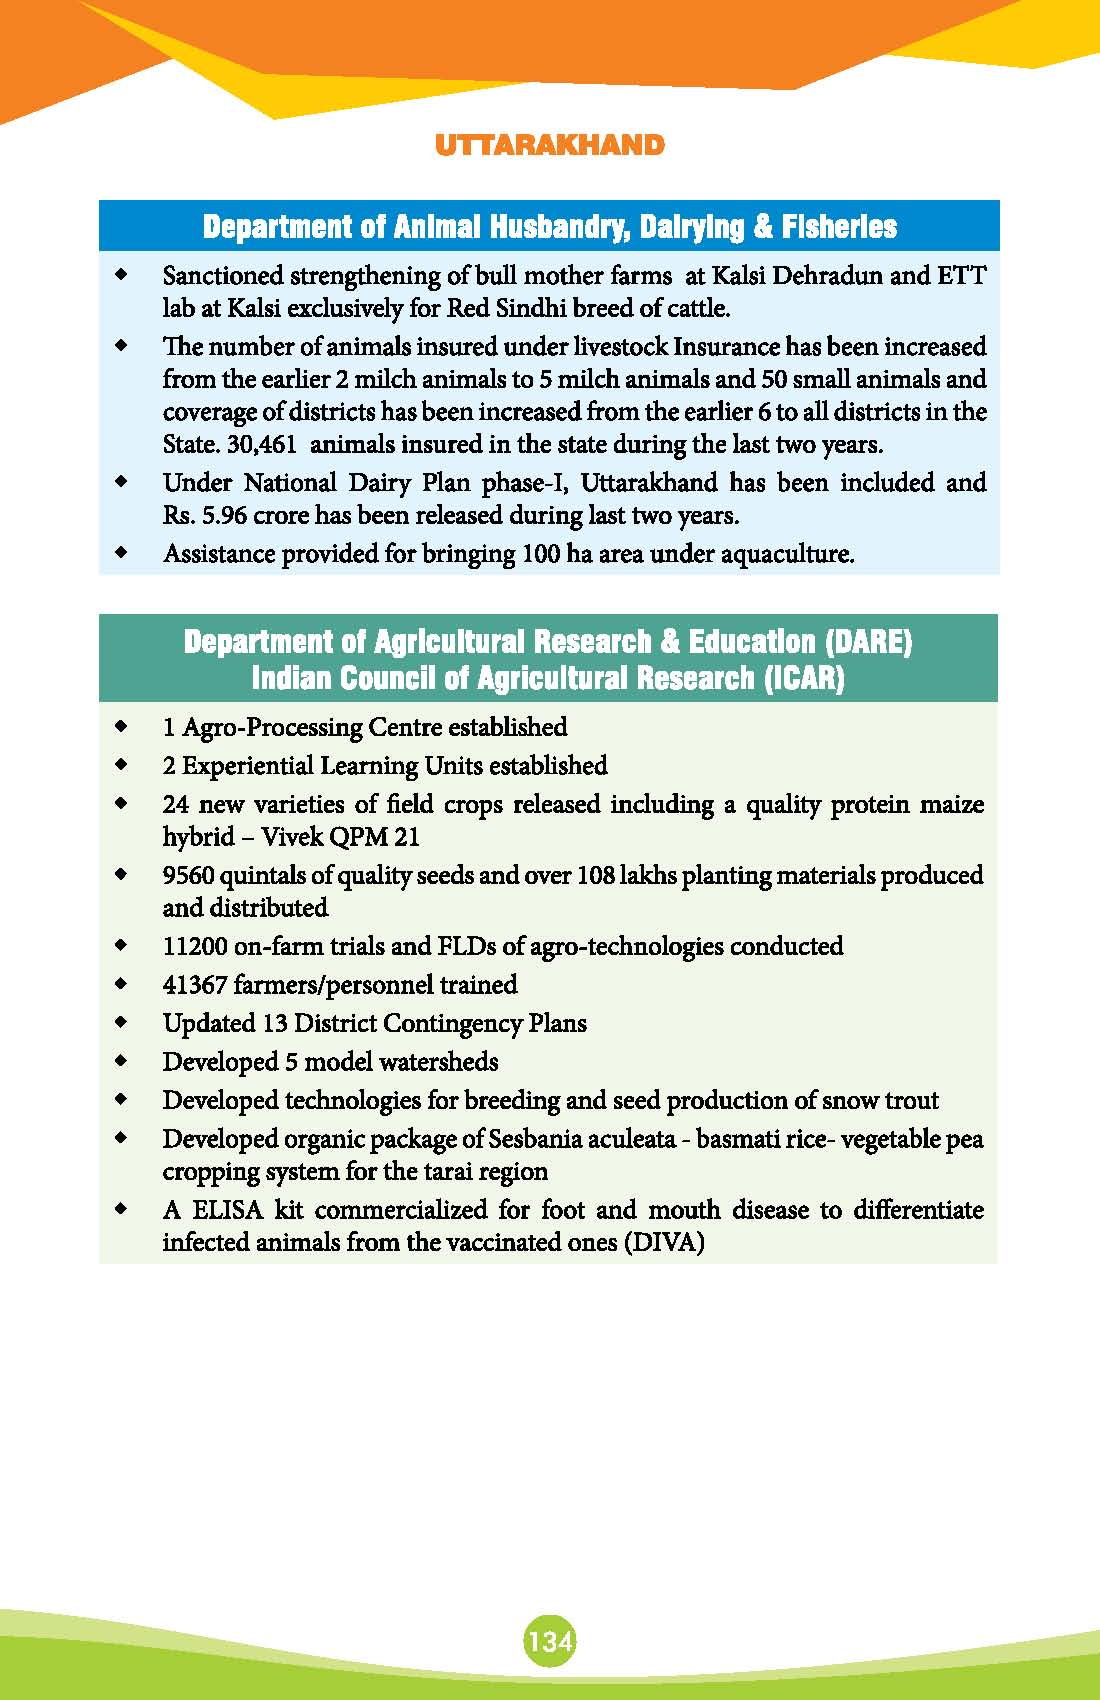 State-Wise-Achievements-2 years_Page_142